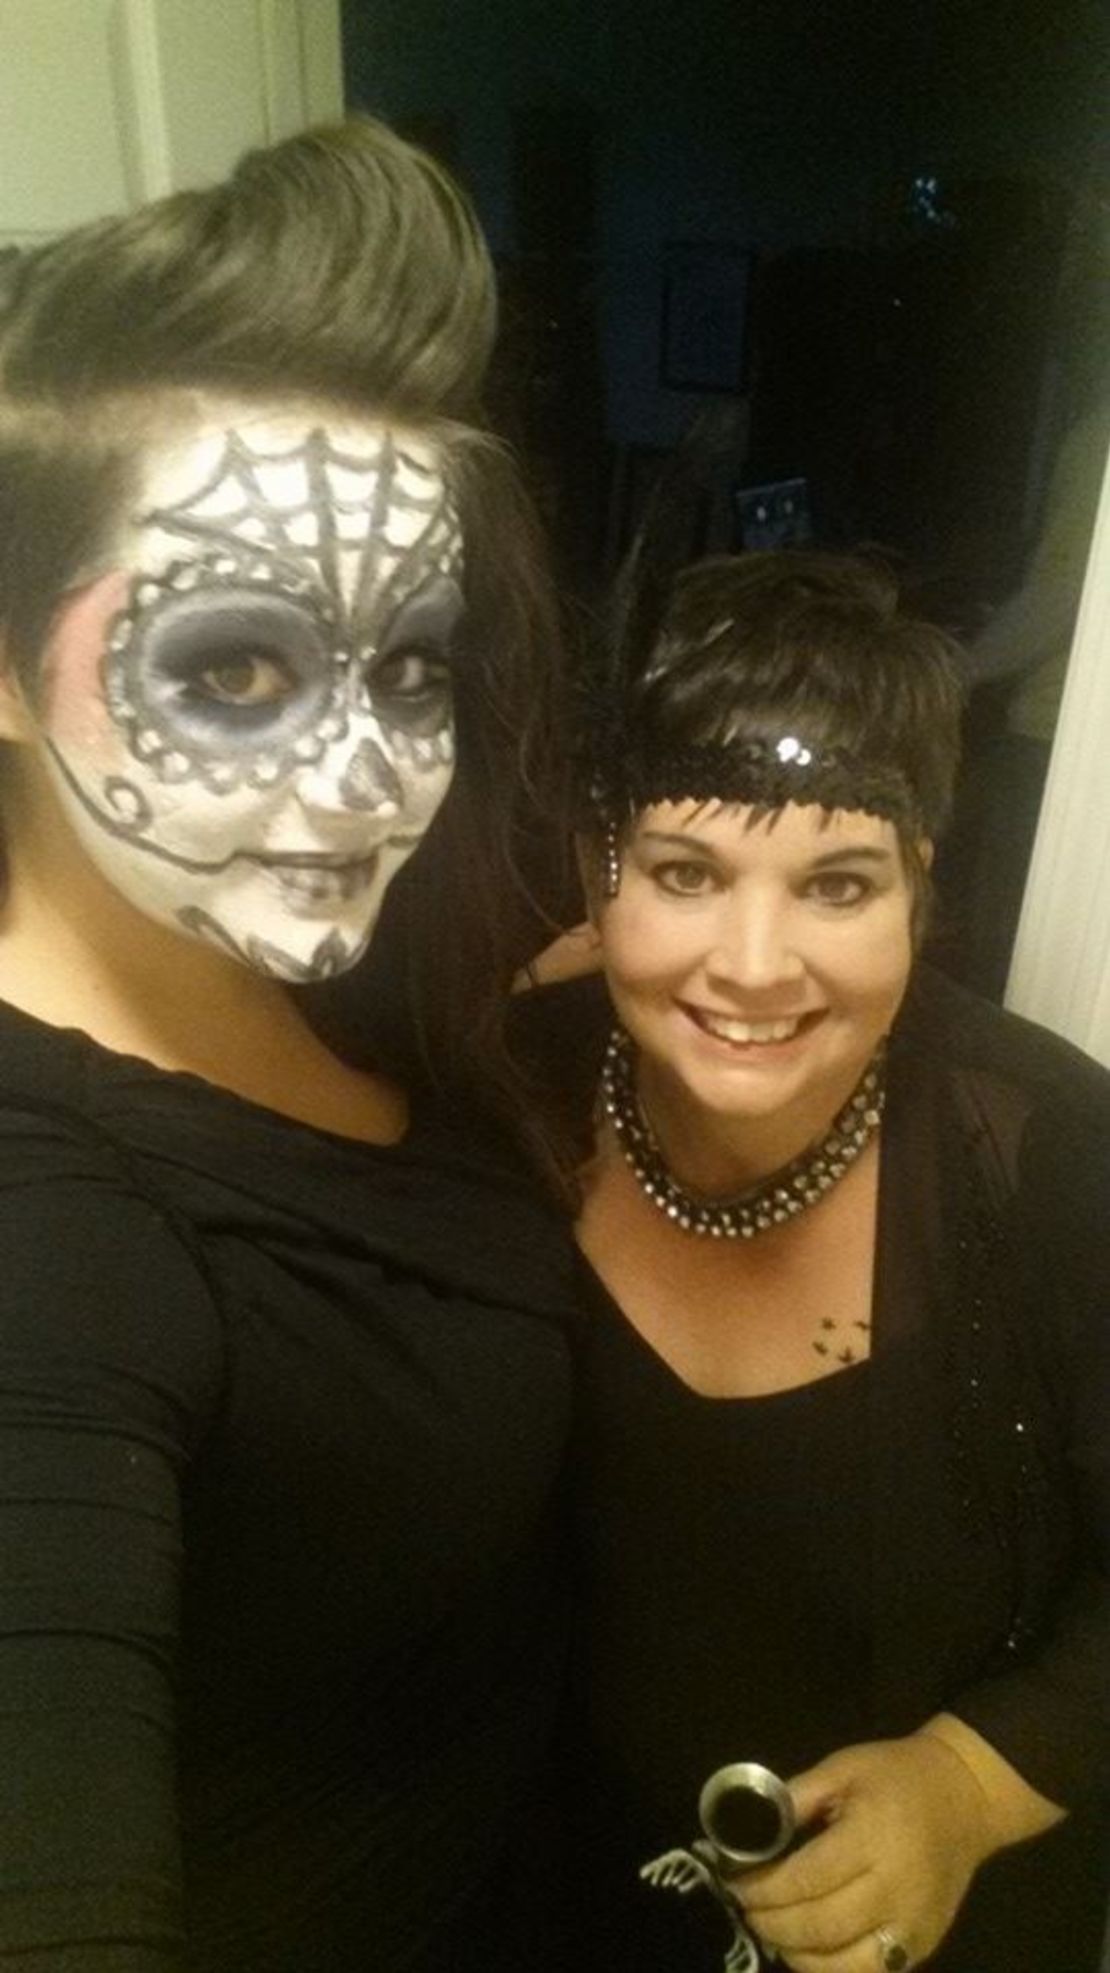 The author and her oldest daughter, Heather, at this year's Halloween party